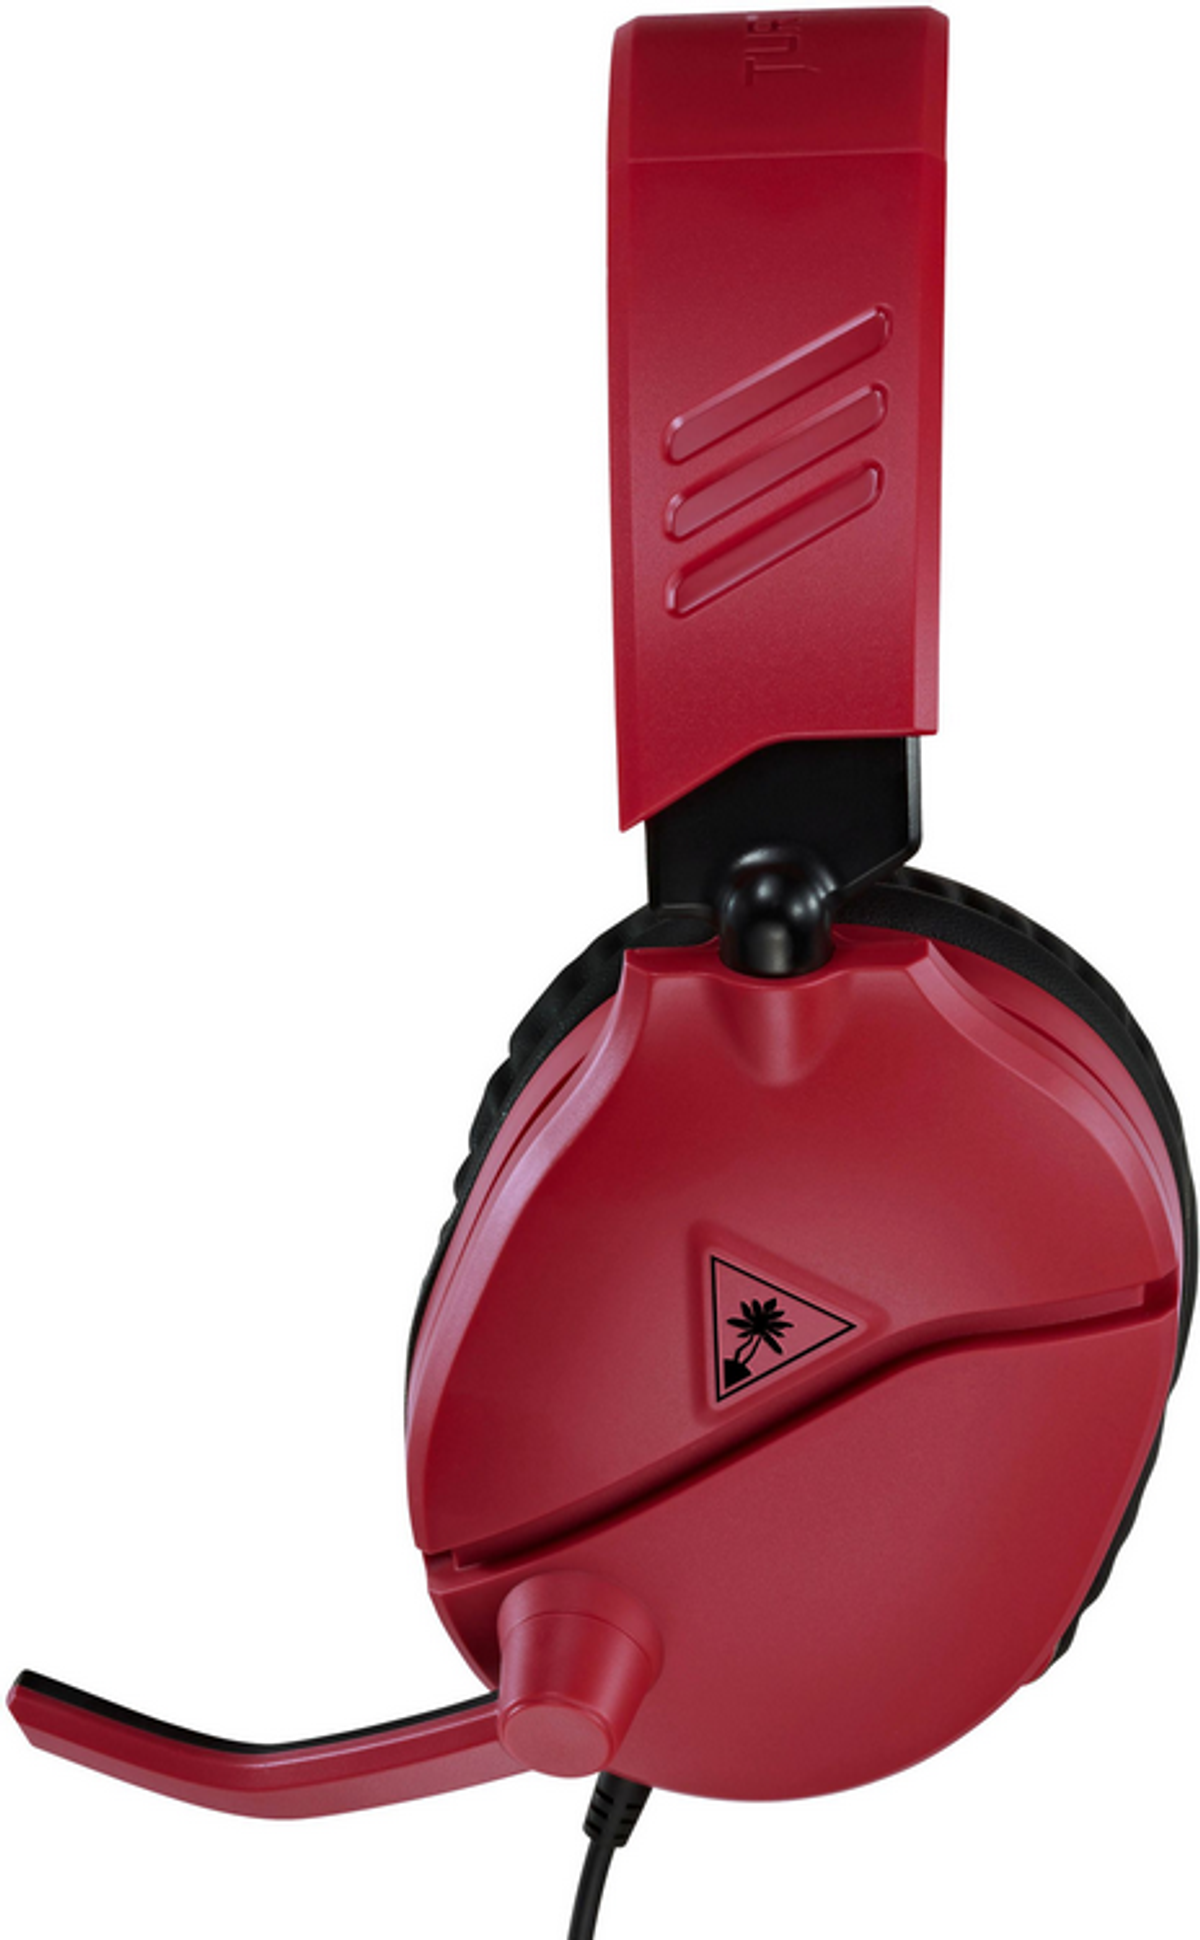 TBS-8055-02 TURTLE 70N RD, Red Over-ear Gaming Midnight BEACH Headset RECON